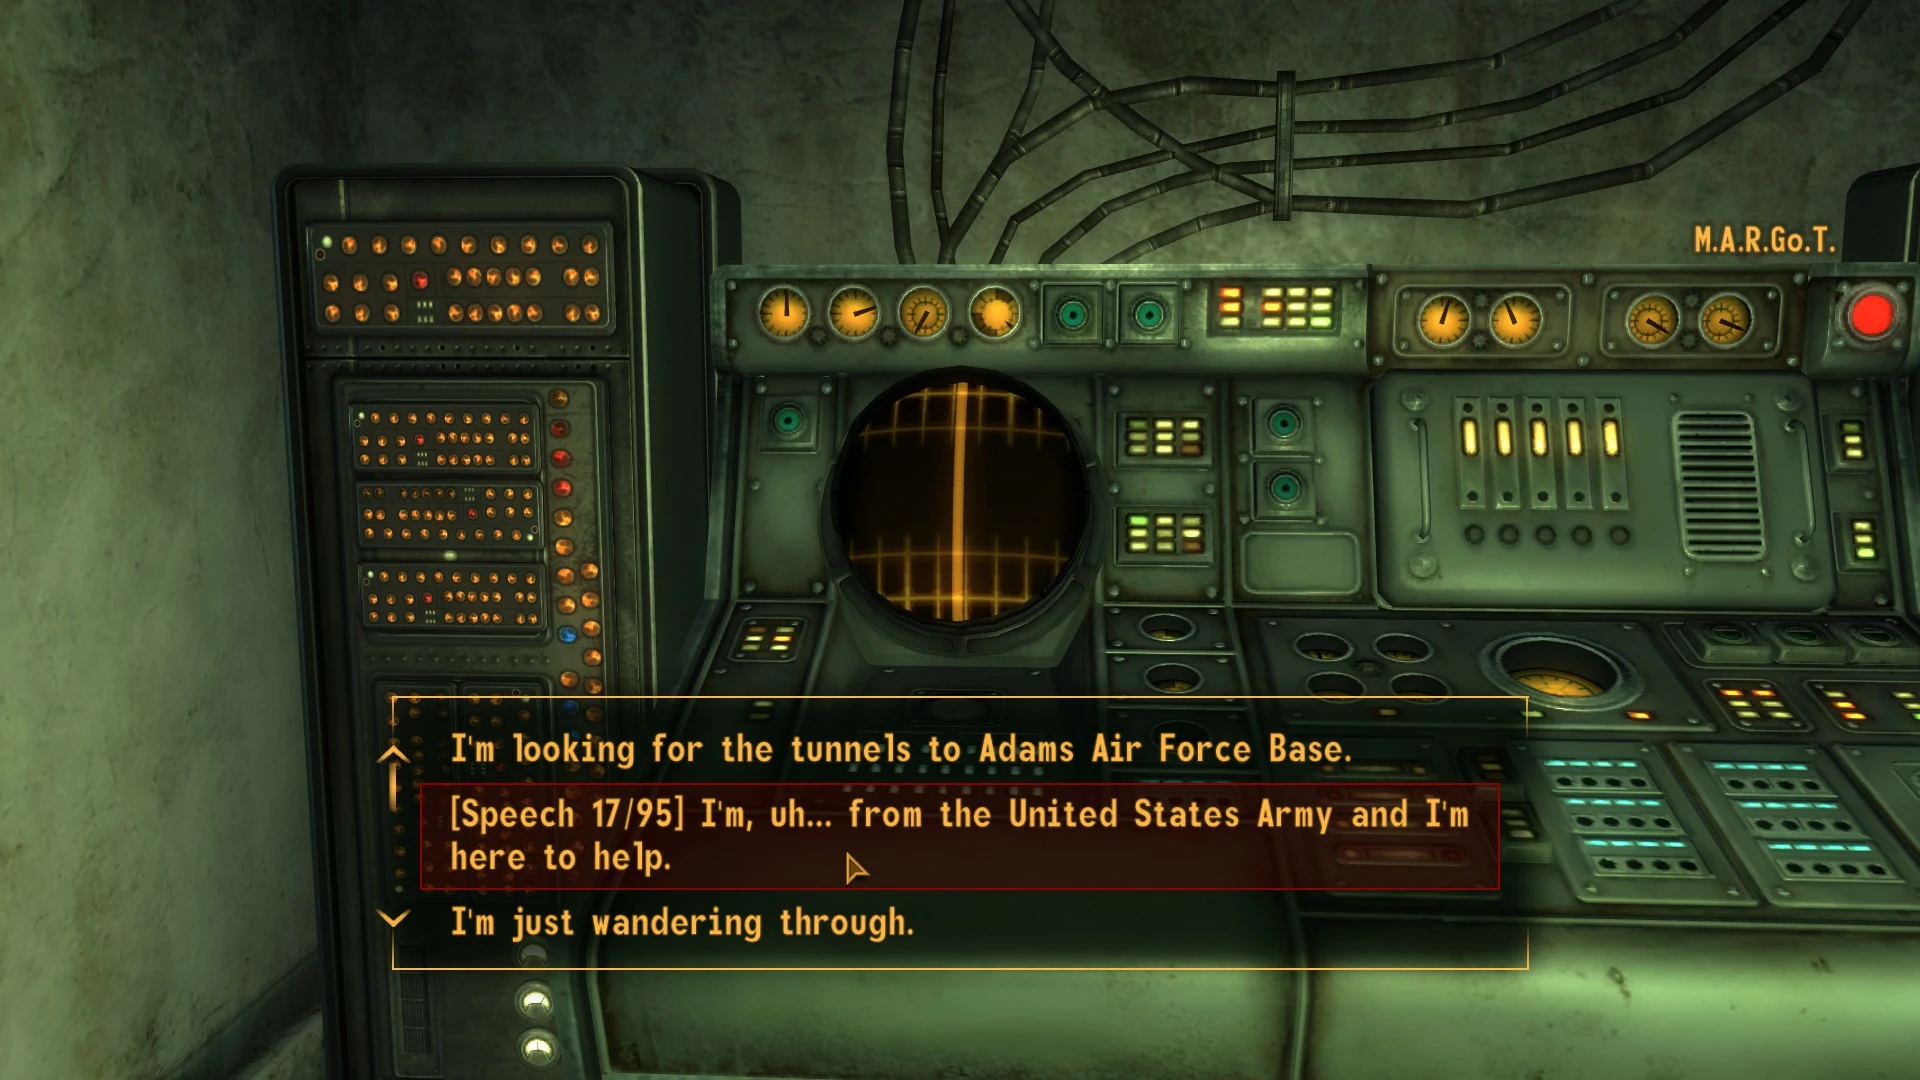 fallout new vegas tale of 2 wastelands